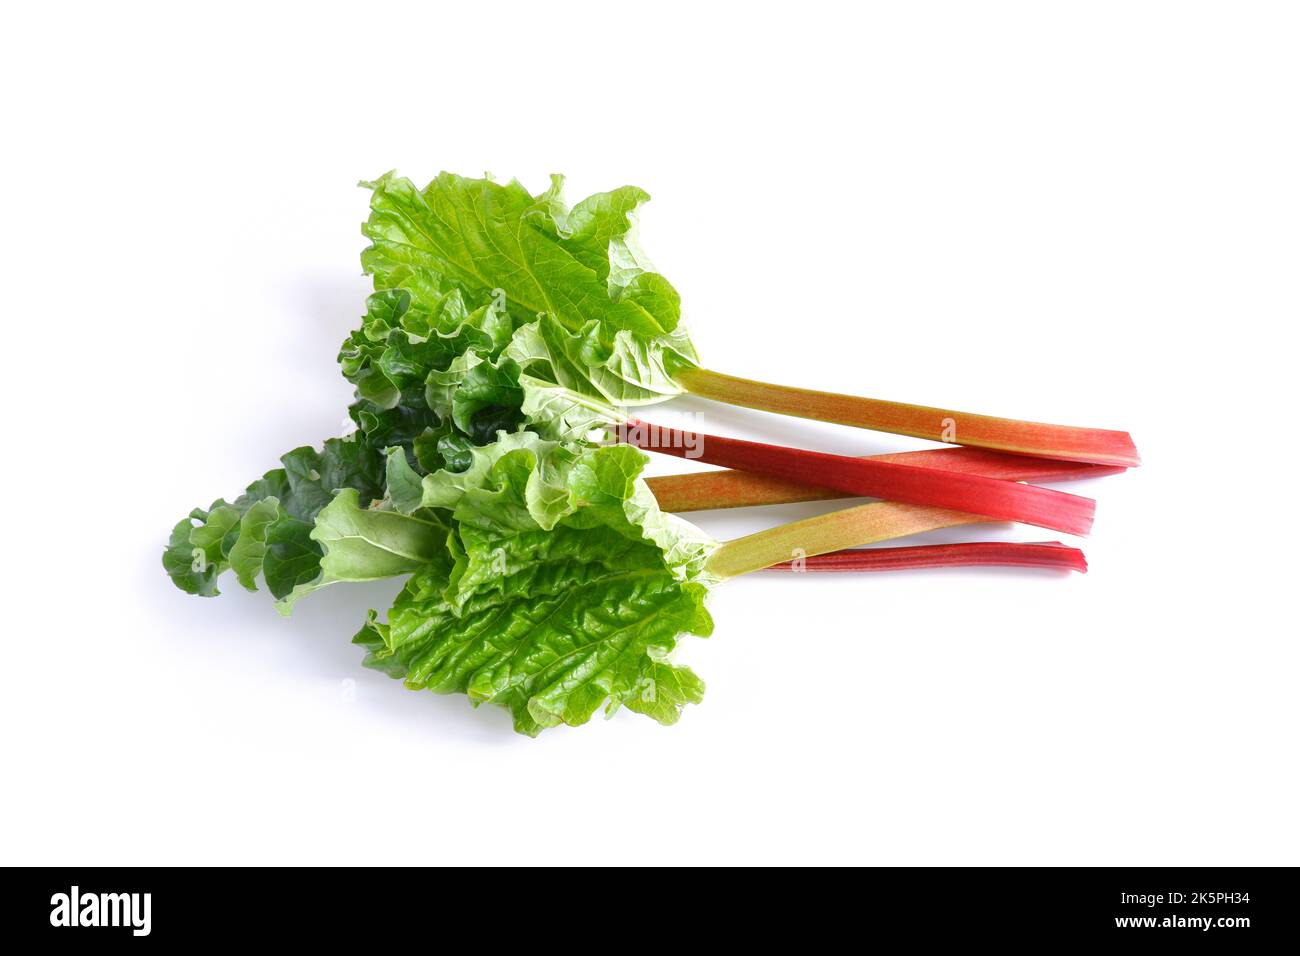 Red and green rhubarb stalks with leaves on a white background. Fresh useful plant from the garden. Stock Photo